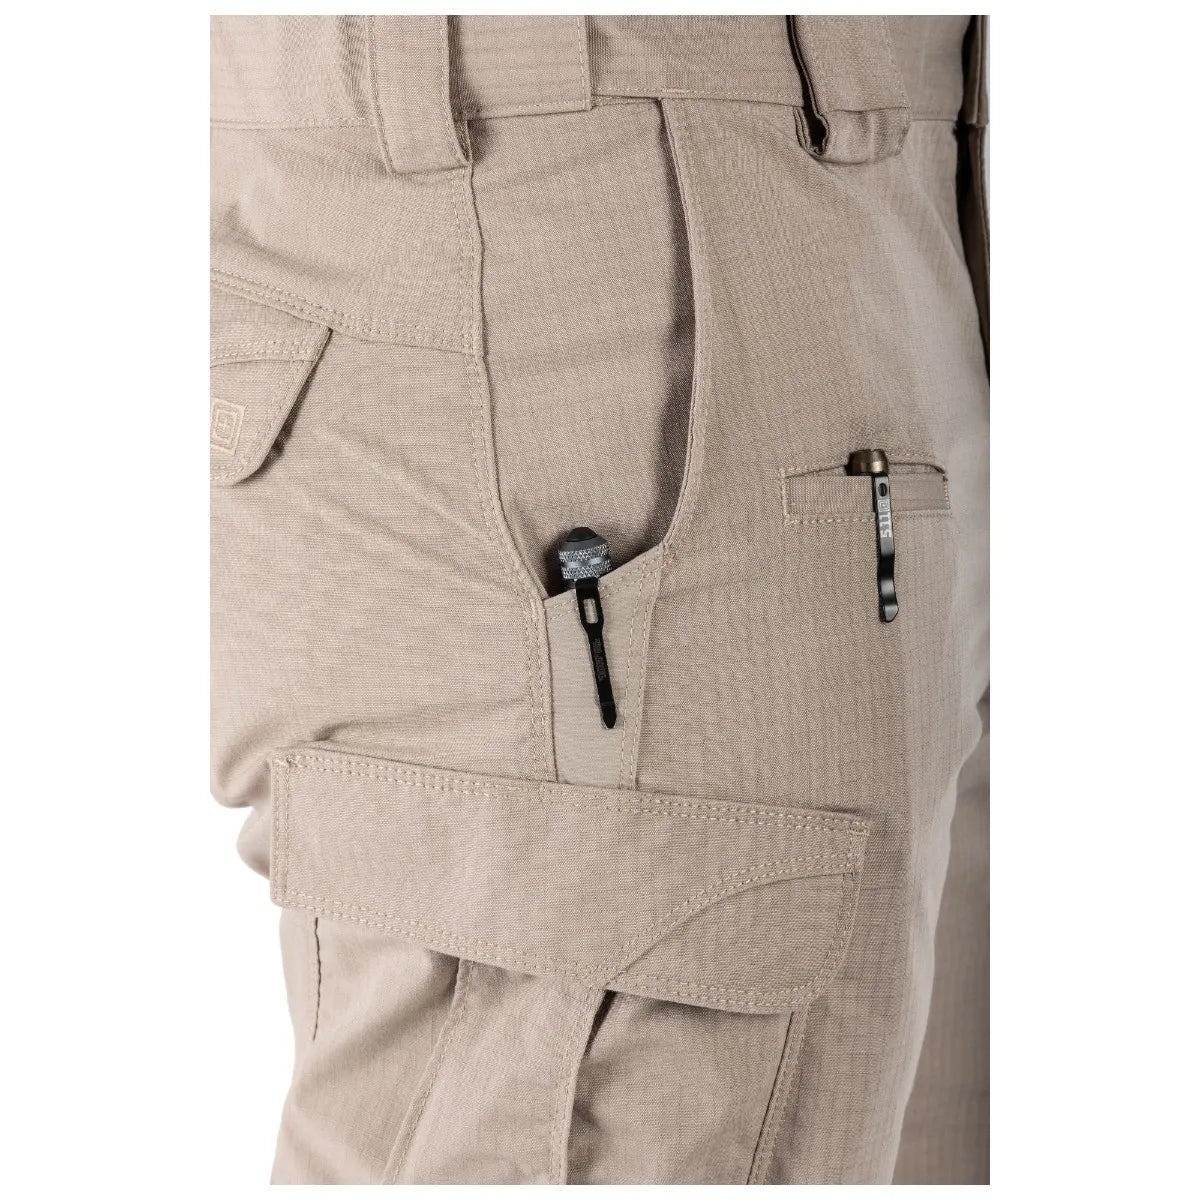 Durable Tactical Apparel: Reinforced key areas for added durability.